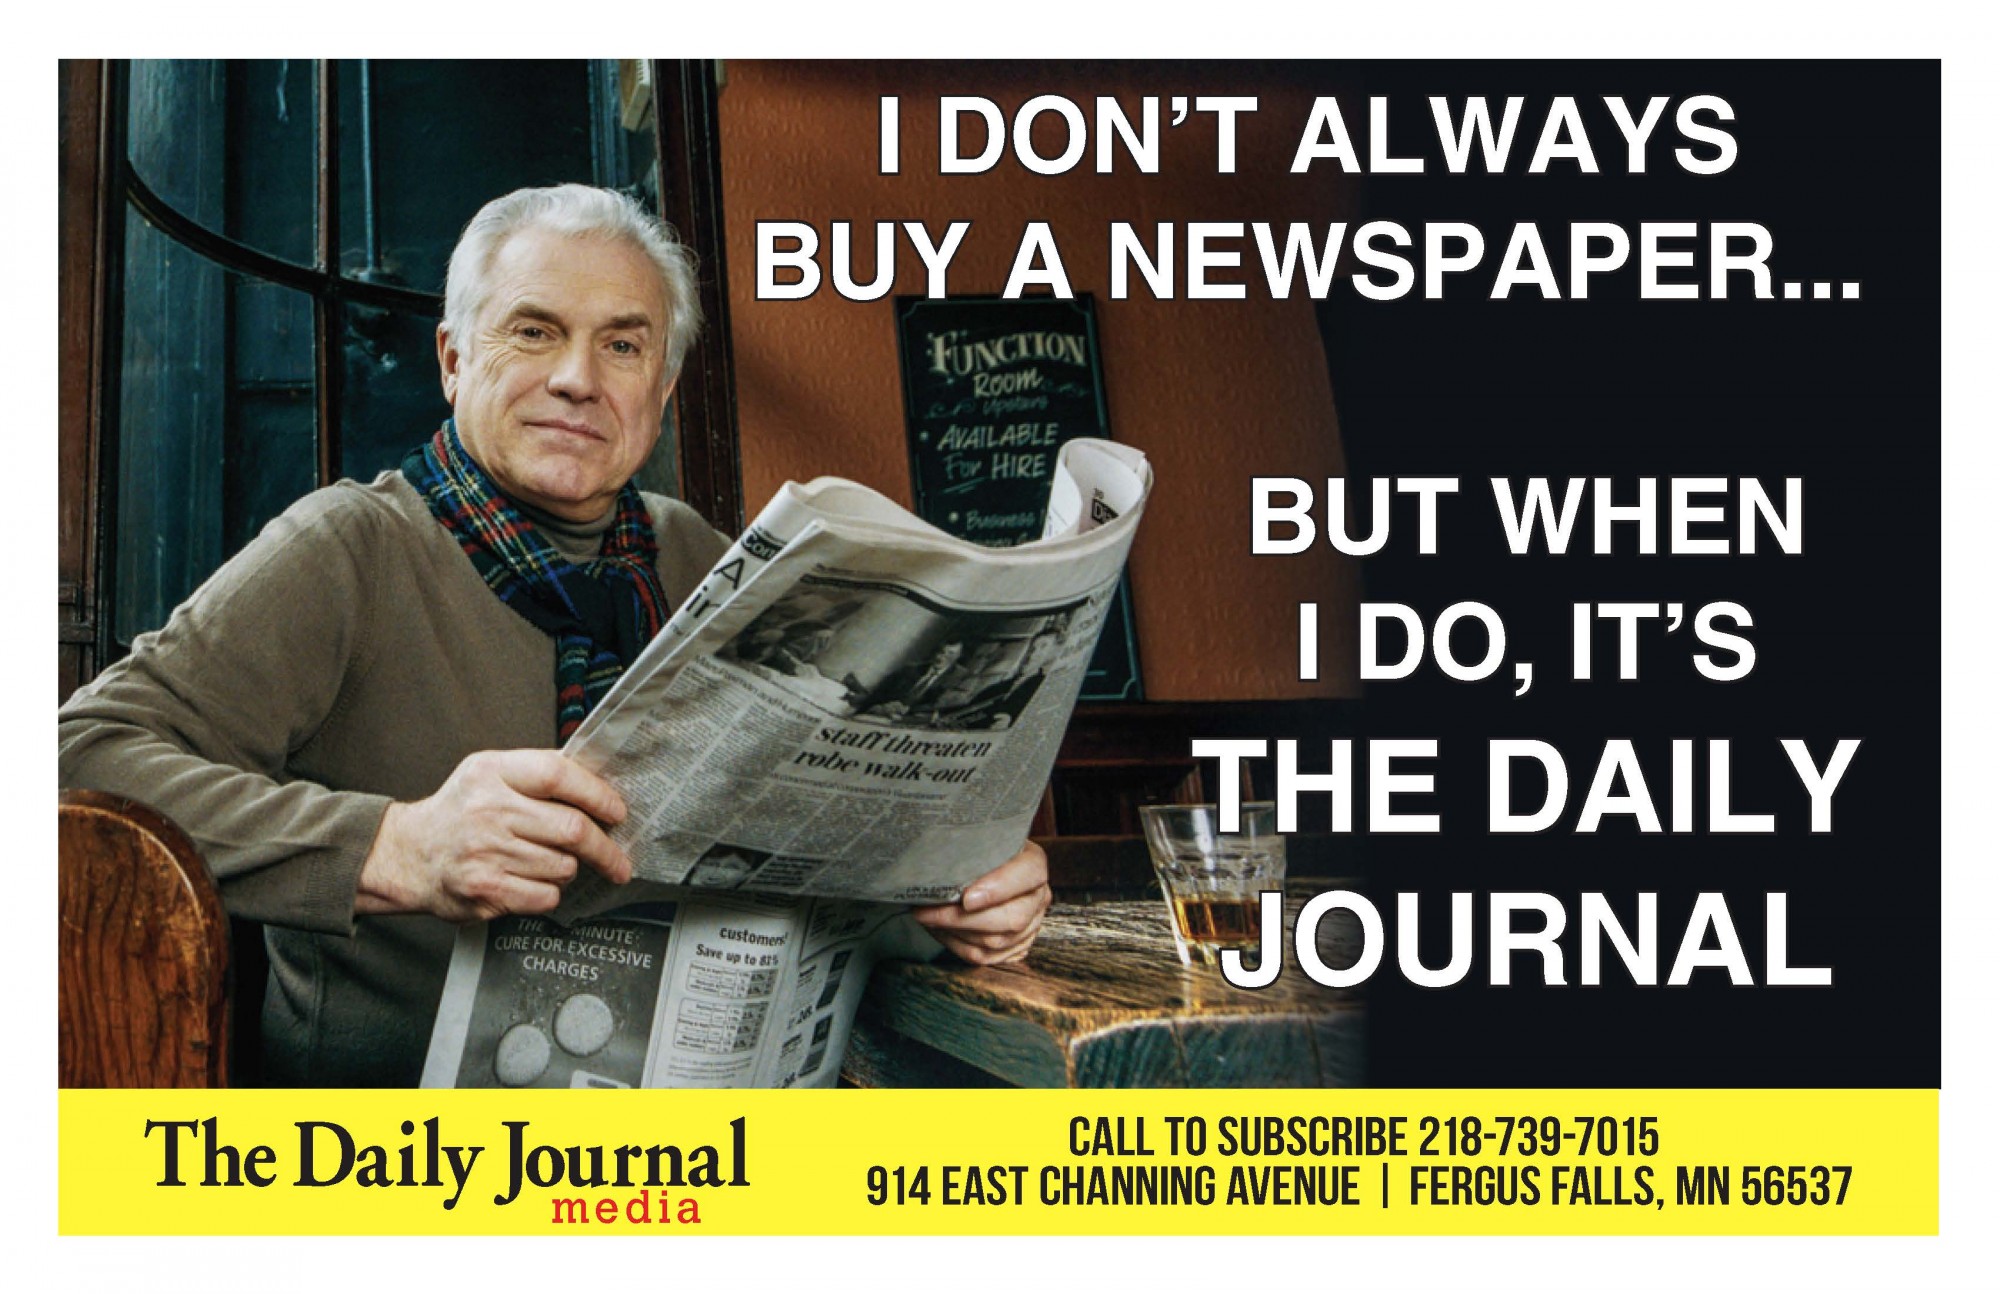 I don't always buy a newspaper, but when I do....